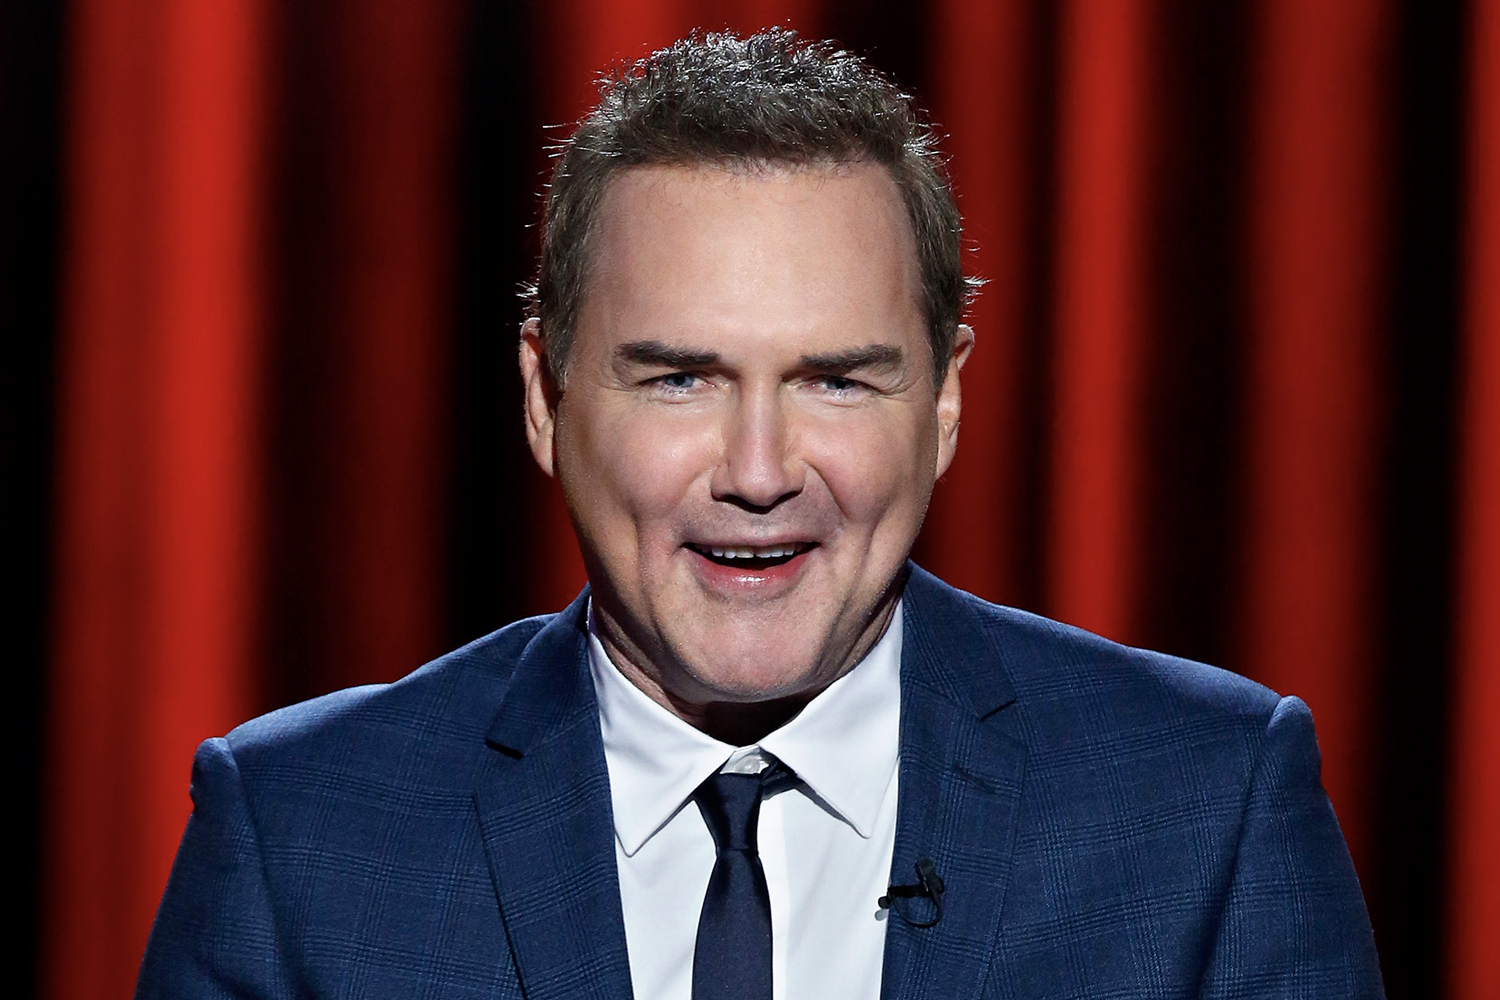 Norm Macdonald smiles standing in front of a red curtain backdrop